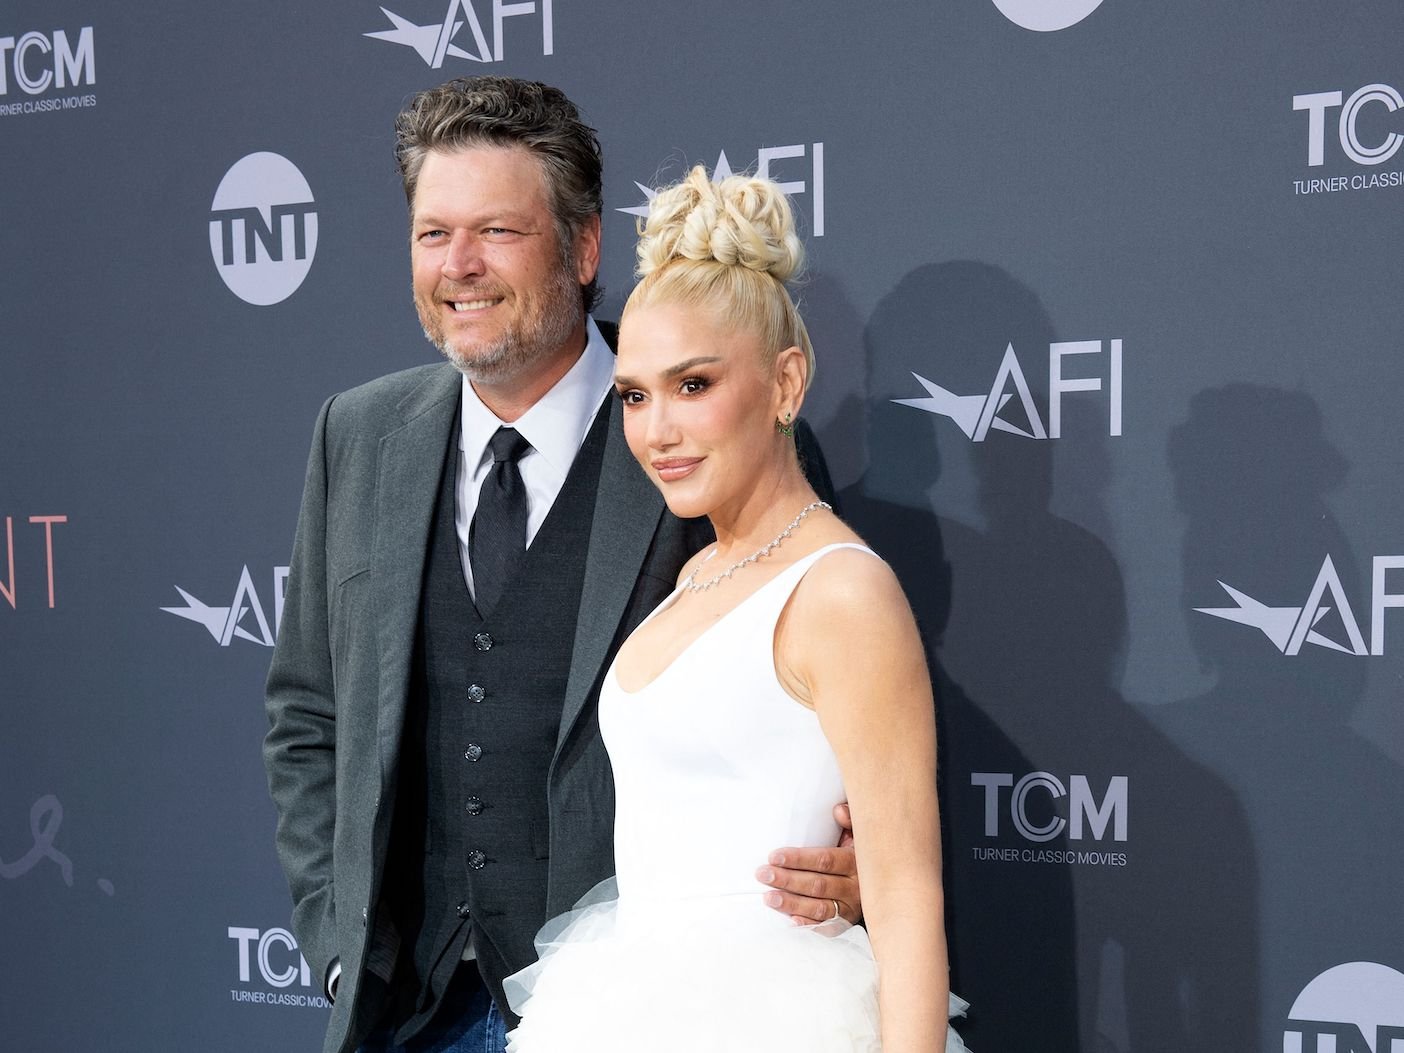 Sketchy Source Says Blake Shelton Supposedly Hates Gwen Stefani’s Plastic Surgery Obsession